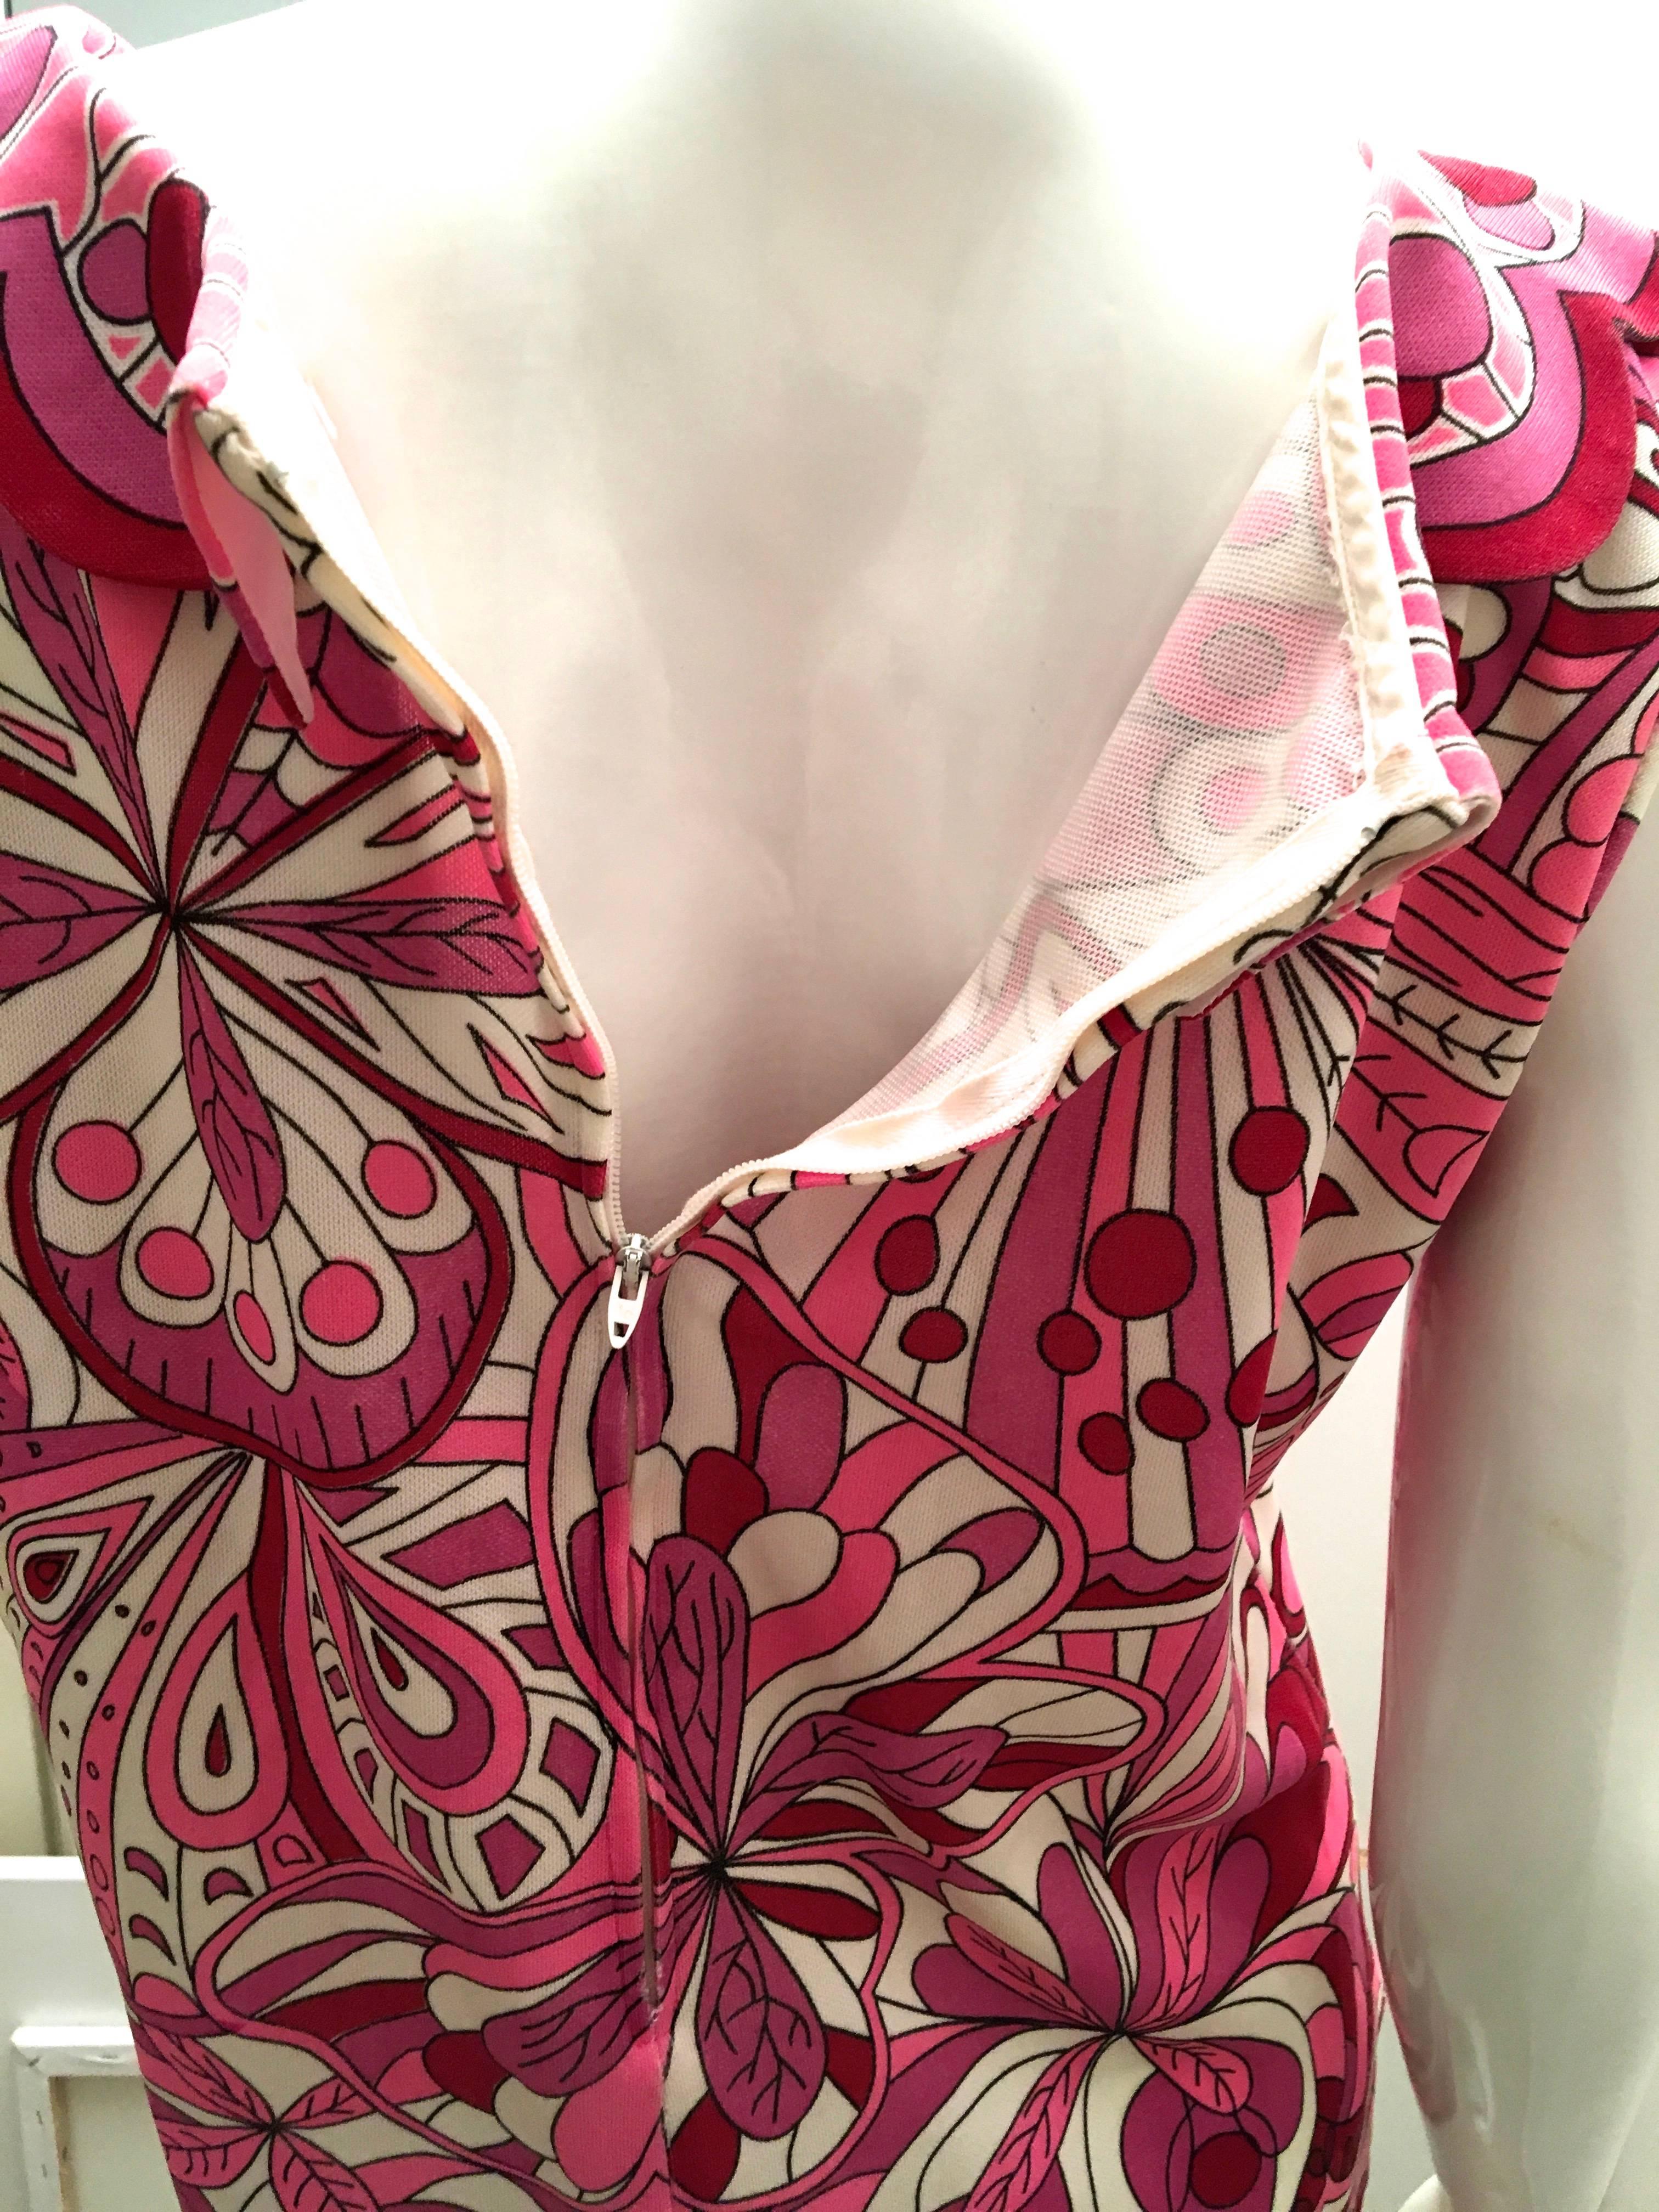 Mr. Dino 1960's Floral Top - Scalloped Edges - Extremely Rare For Sale 3